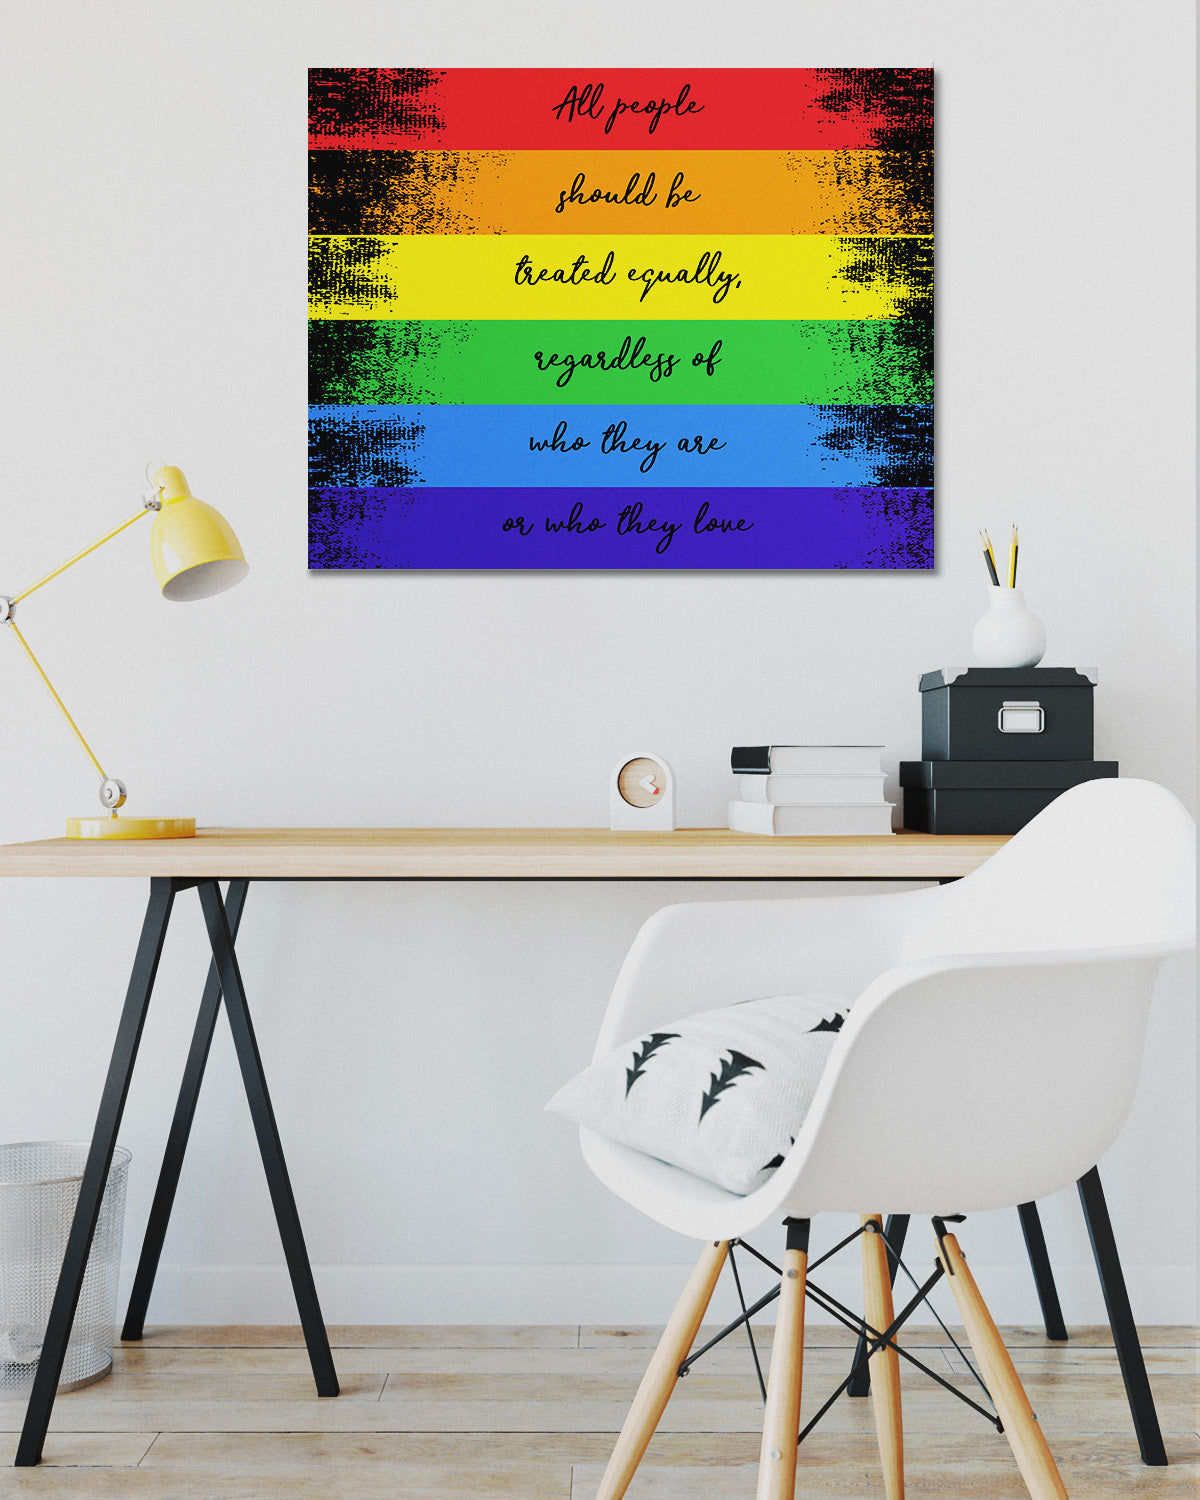 All People Should Be Treated Equally - artwork printed on canvas inspired by the LGBTQ community - great gift for relatives and friends